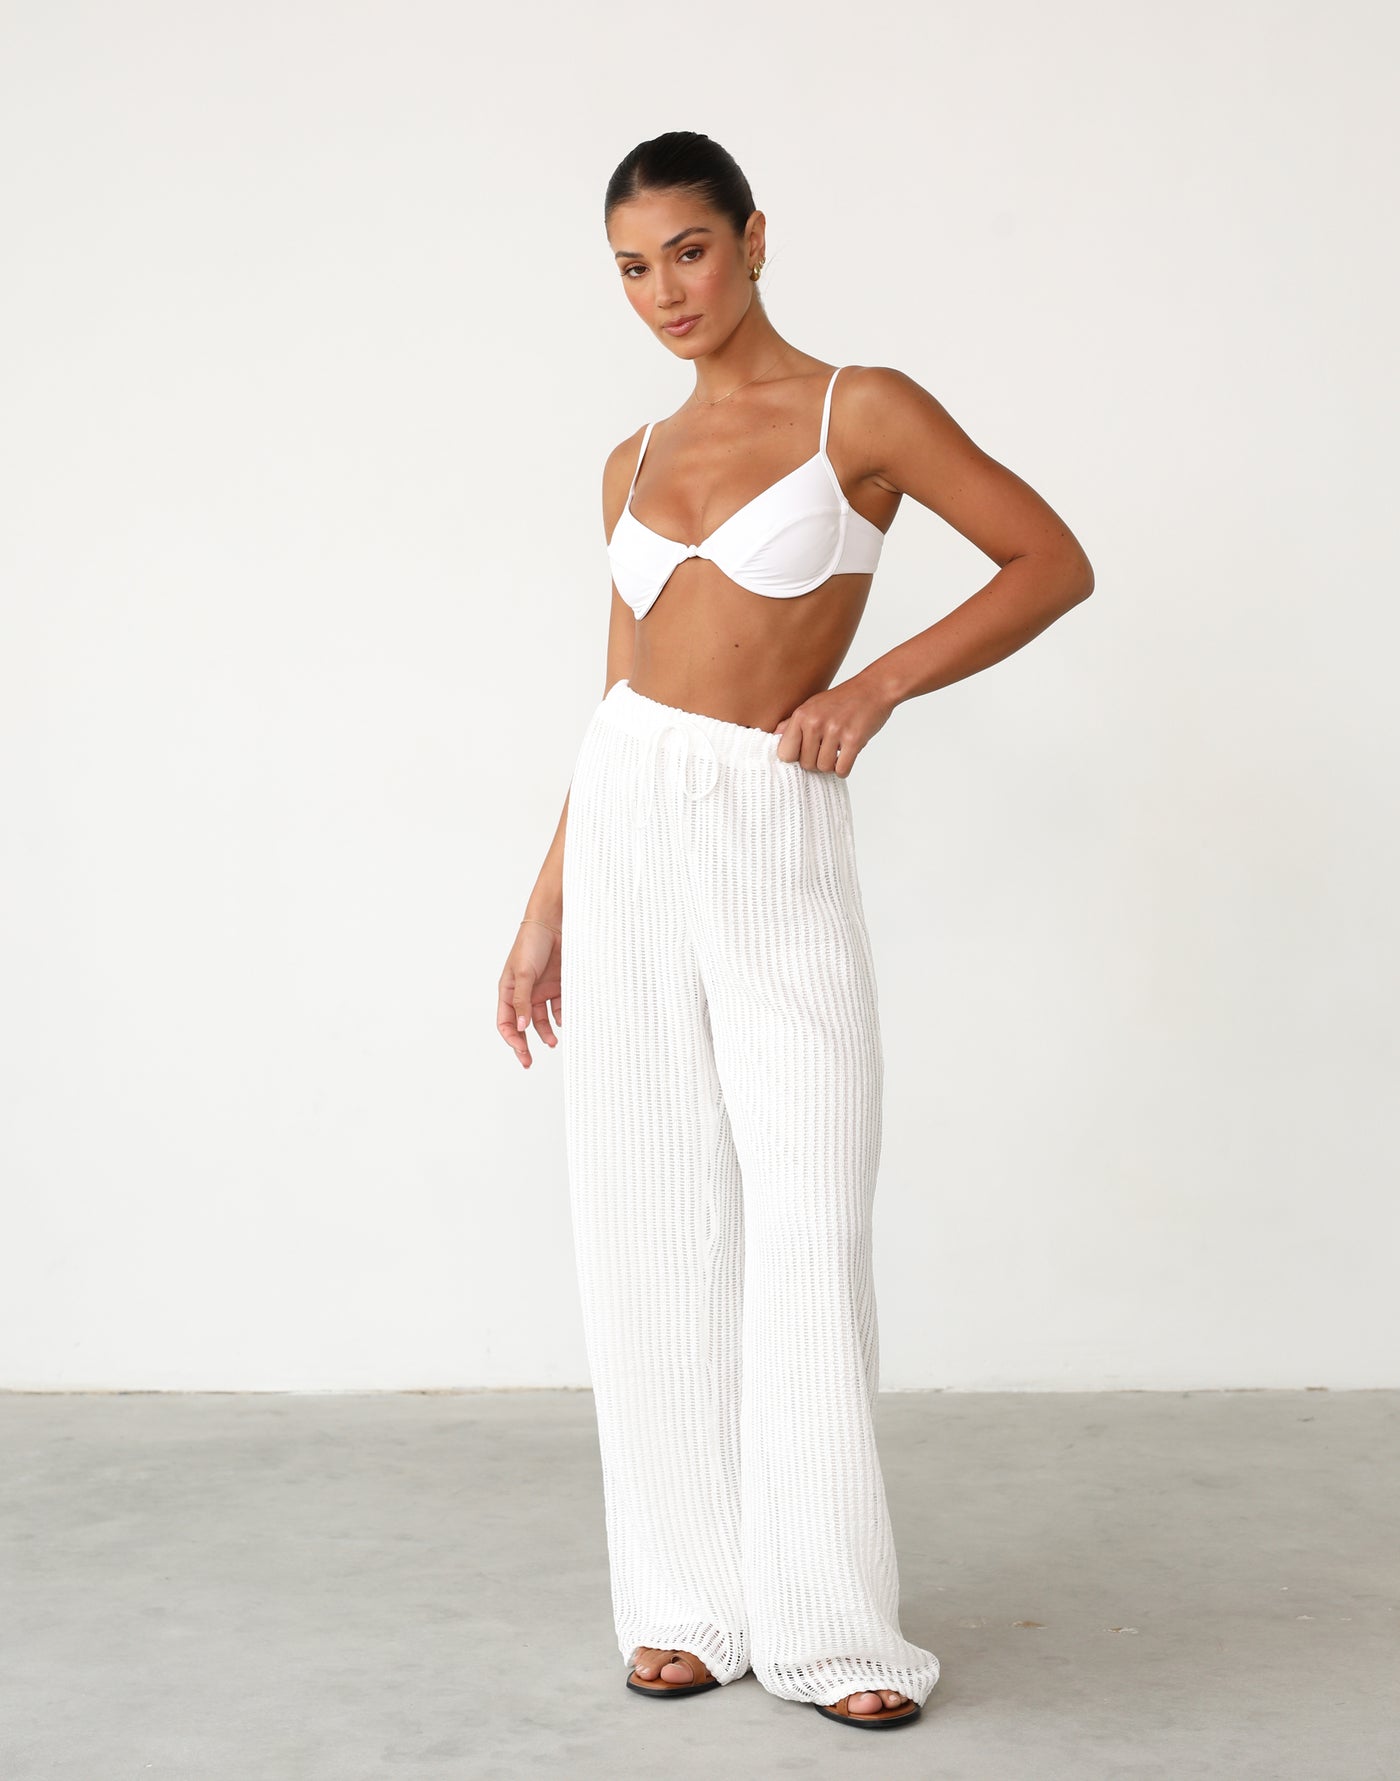 Aliyna Pants (White) - White Knitted High Waisted Pants - Women's Pants - Charcoal Clothing